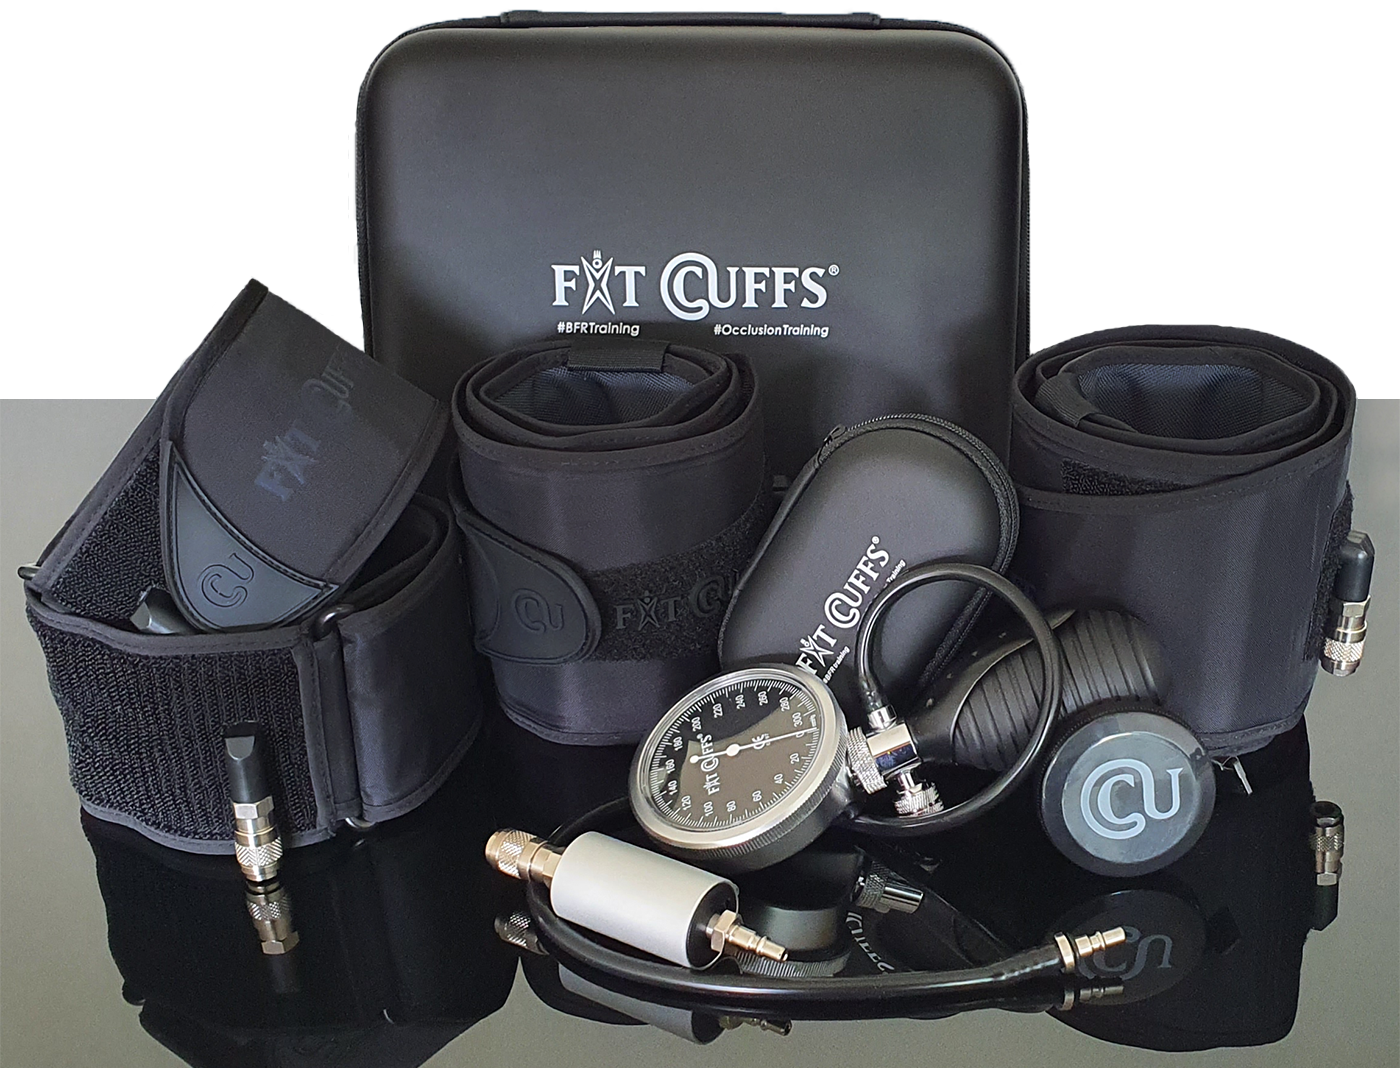 Fit cuffs, fitcuffs, okklusionstræning occlusion training, blood flow restriction exercise, oclusao vascular, vascular occlusion, bfrtraining kaatsu